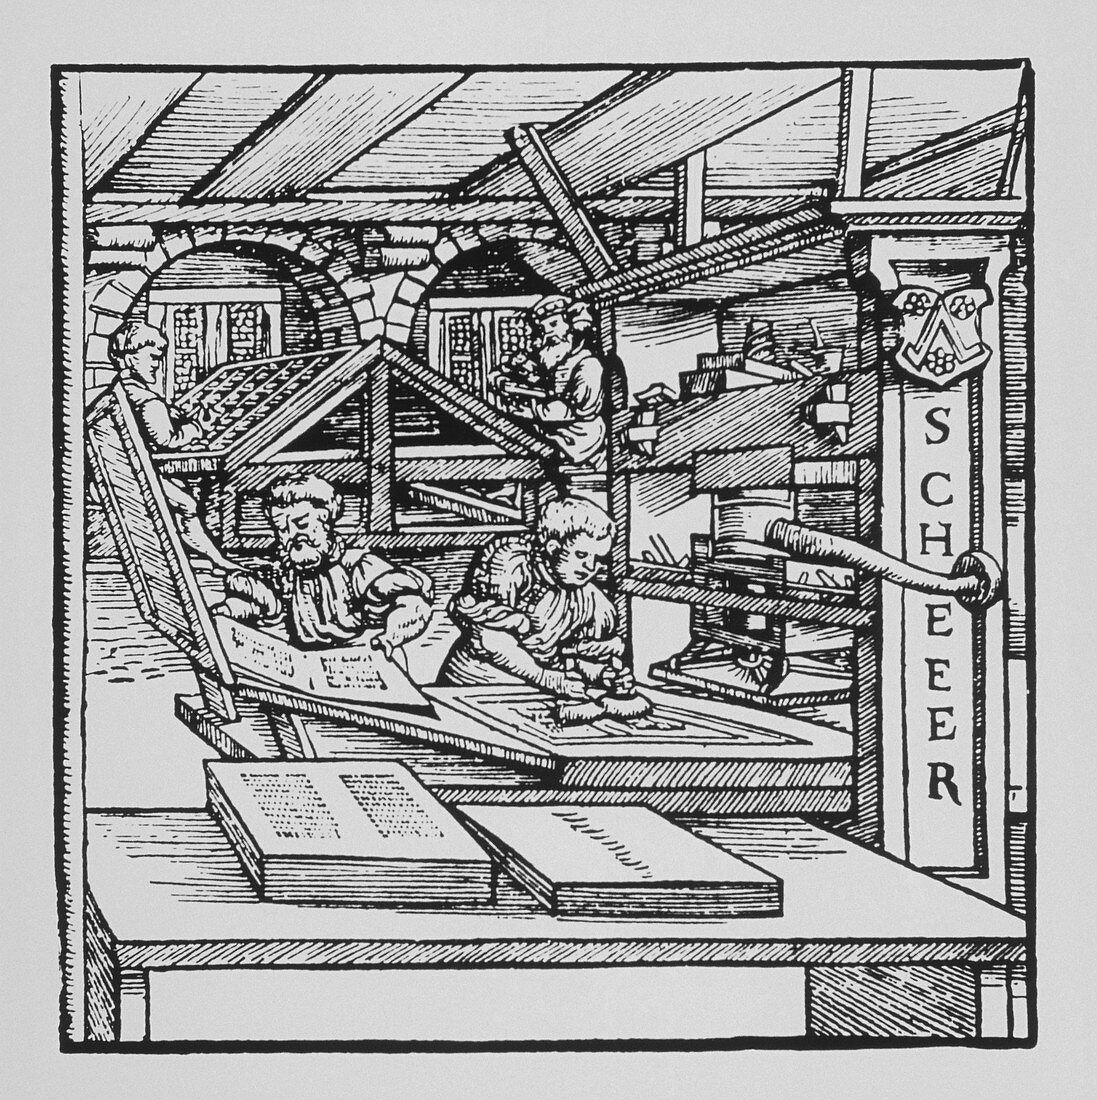 Engraving of a 16th century printing press